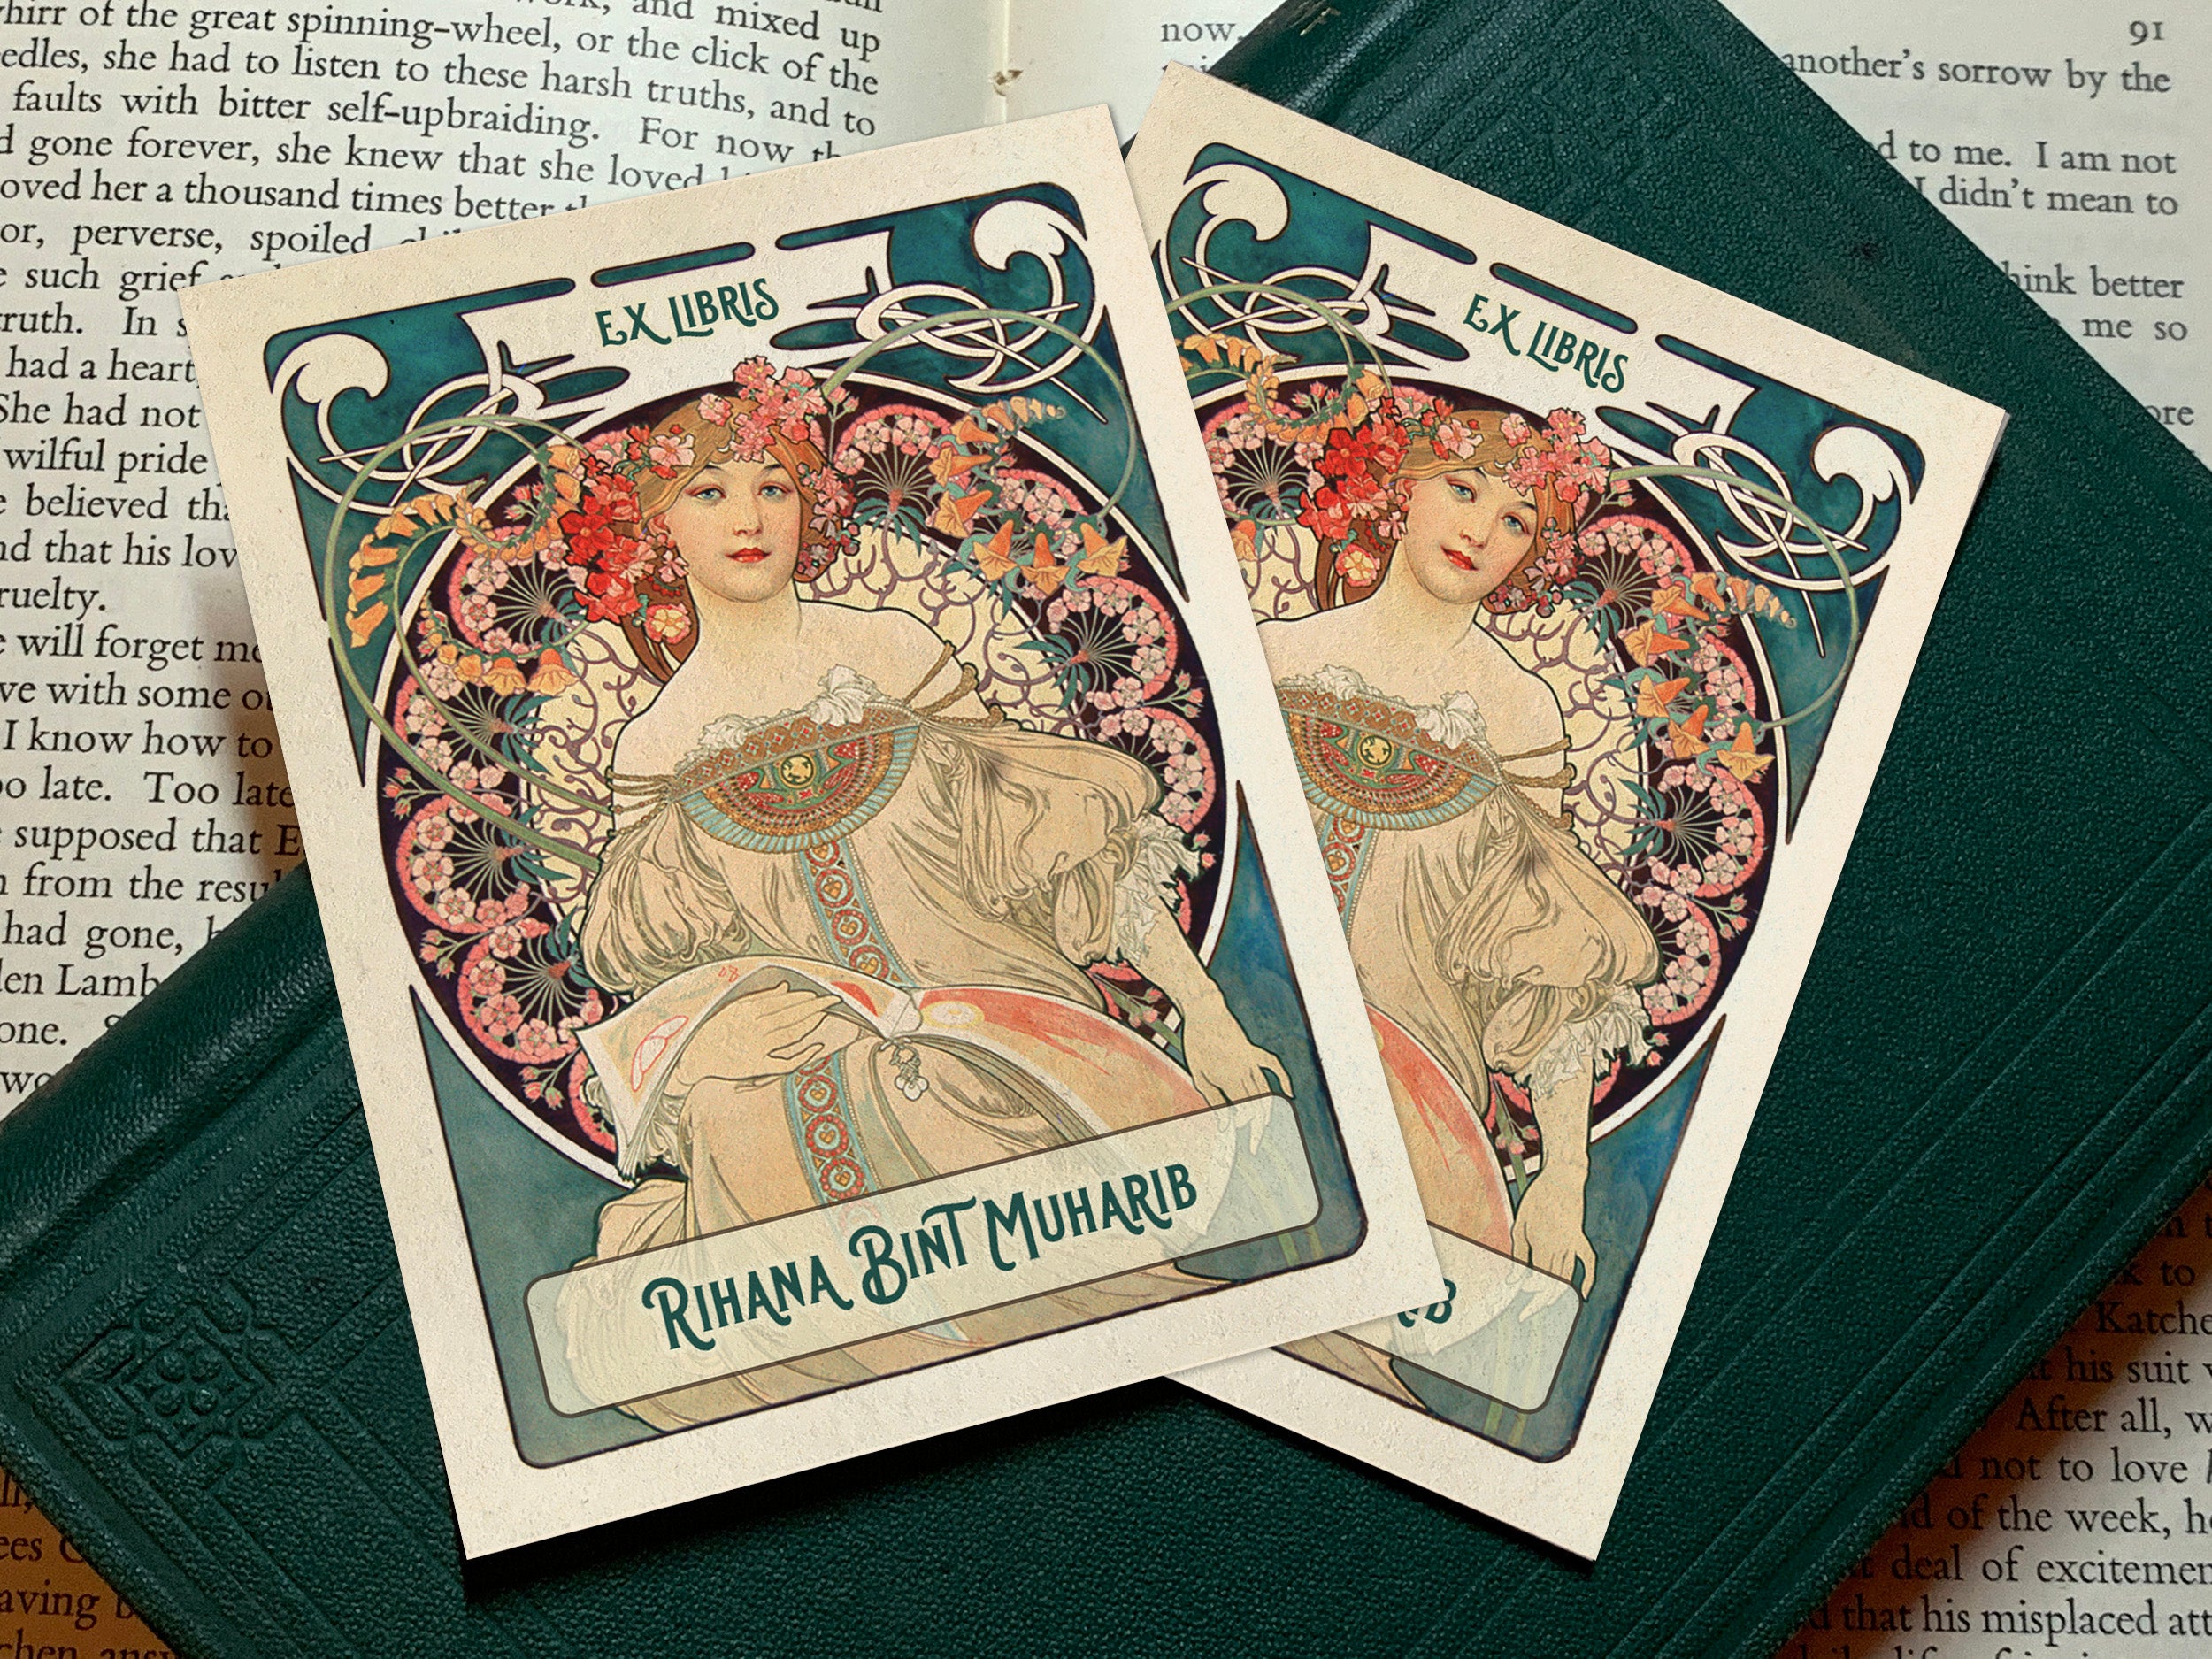 Literature Muse by Alphonse Mucha, Personalized Art Nouveau Ex-Libris Bookplates, Crafted on Traditional Gummed Paper, 3in x 4in, Set of 30